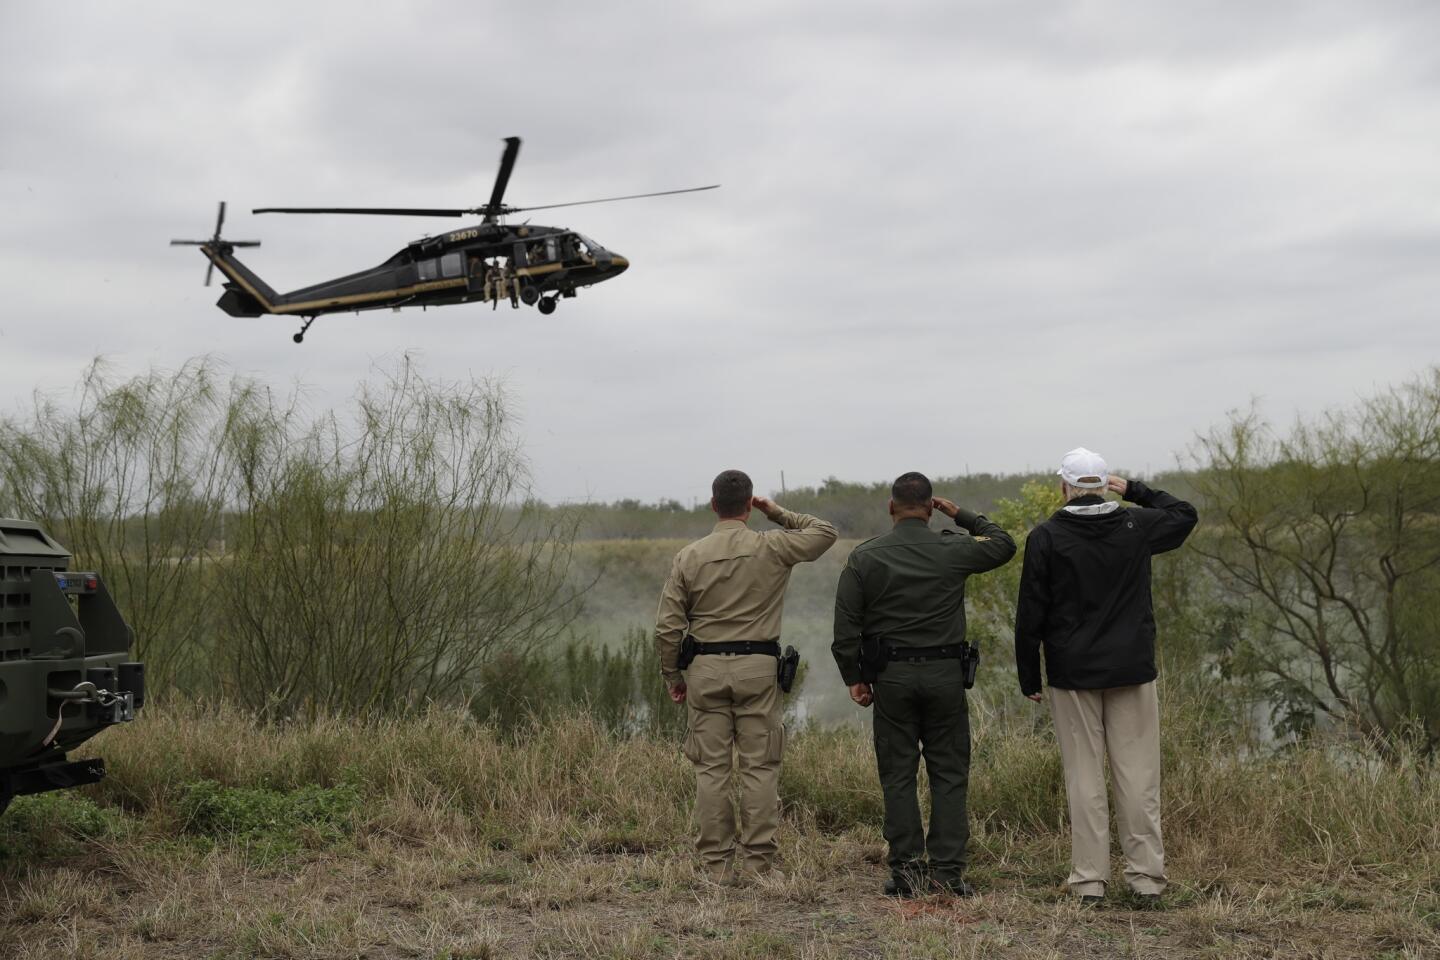 President Trump salutes a U.S. Customs and Border Protection helicopter as he tours the U.S.-Mexico border Jan. 10 in McAllen, Texas.